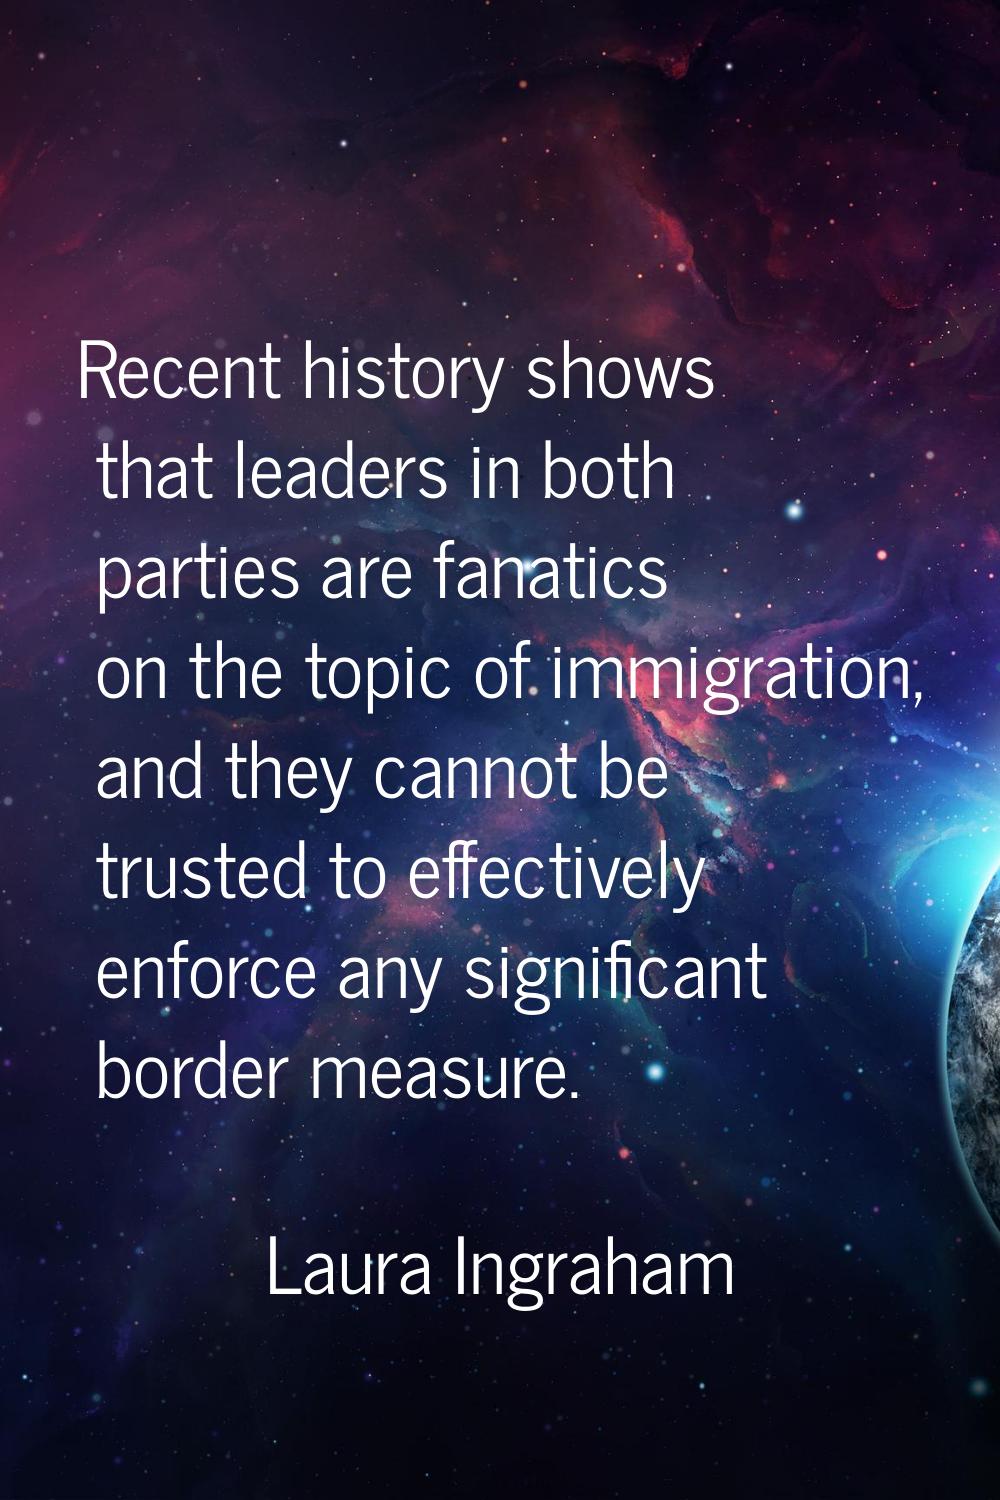 Recent history shows that leaders in both parties are fanatics on the topic of immigration, and the